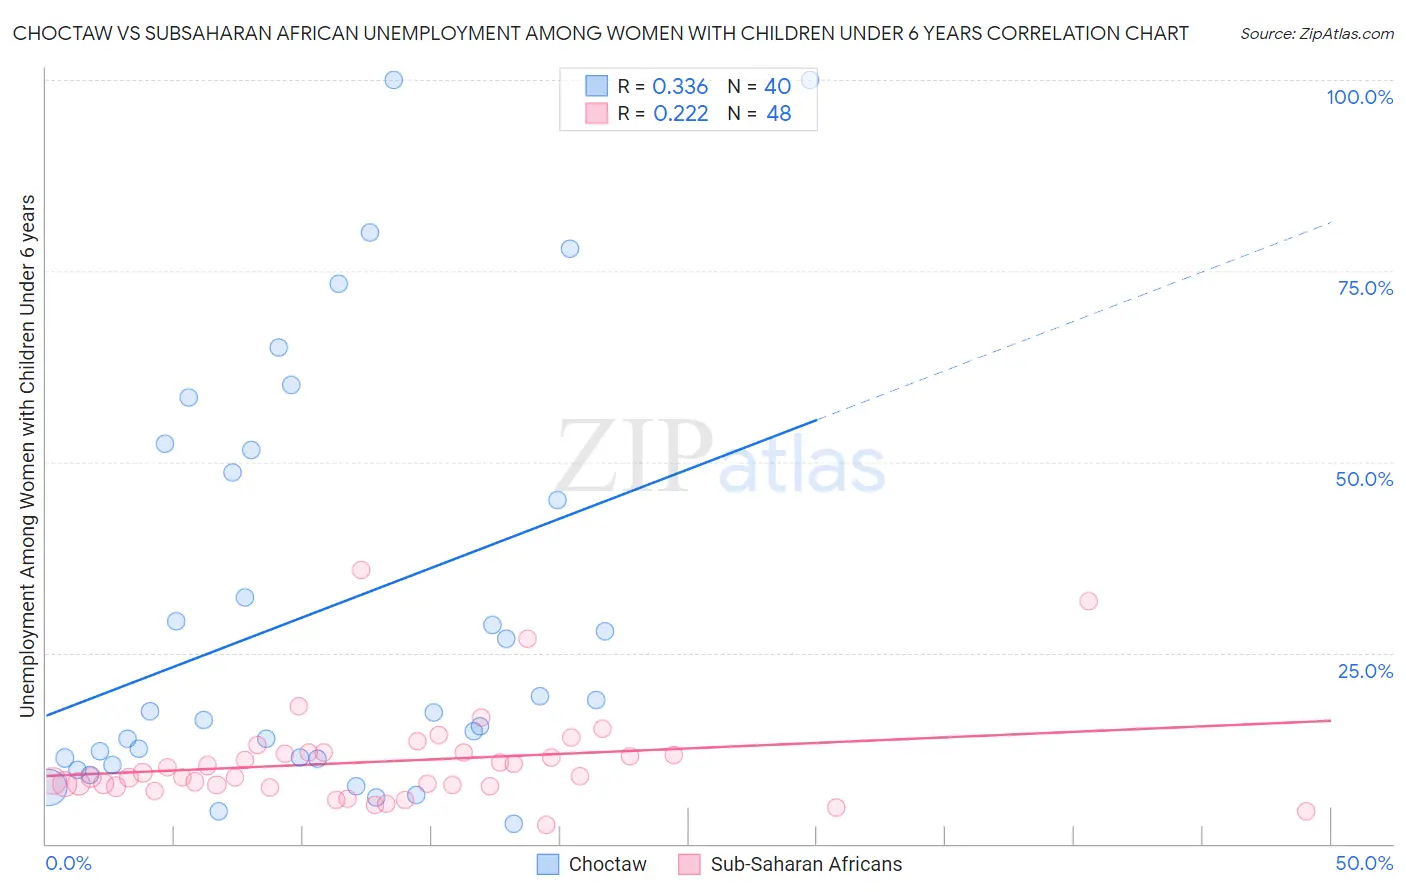 Choctaw vs Subsaharan African Unemployment Among Women with Children Under 6 years